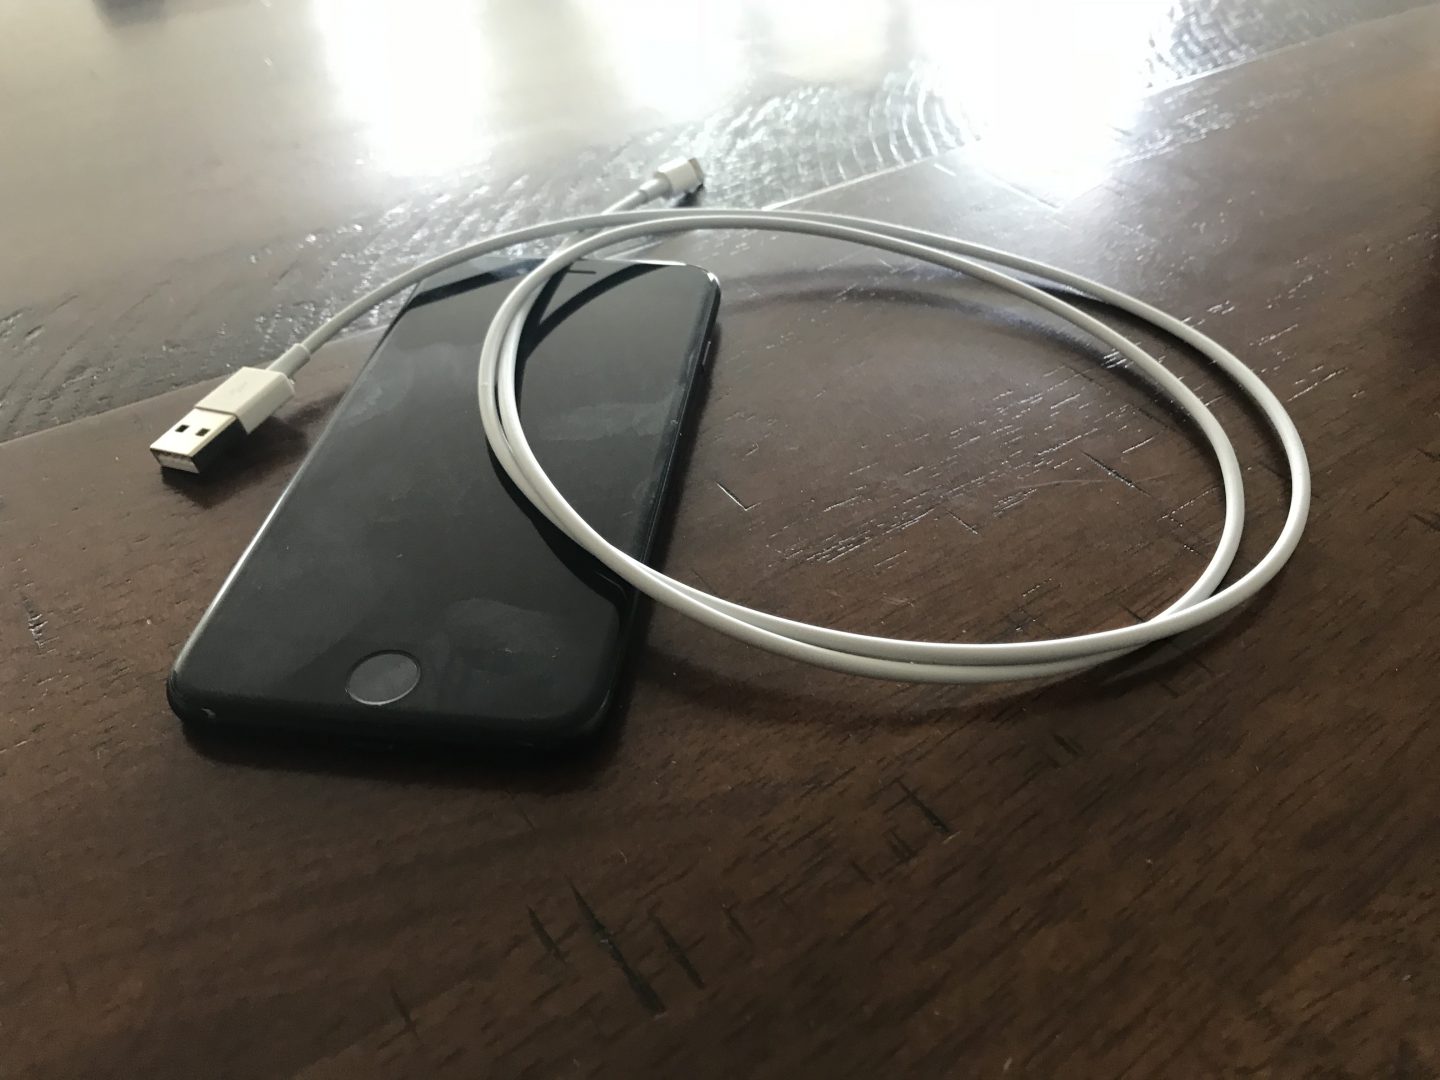 iphone wont turn on check cable